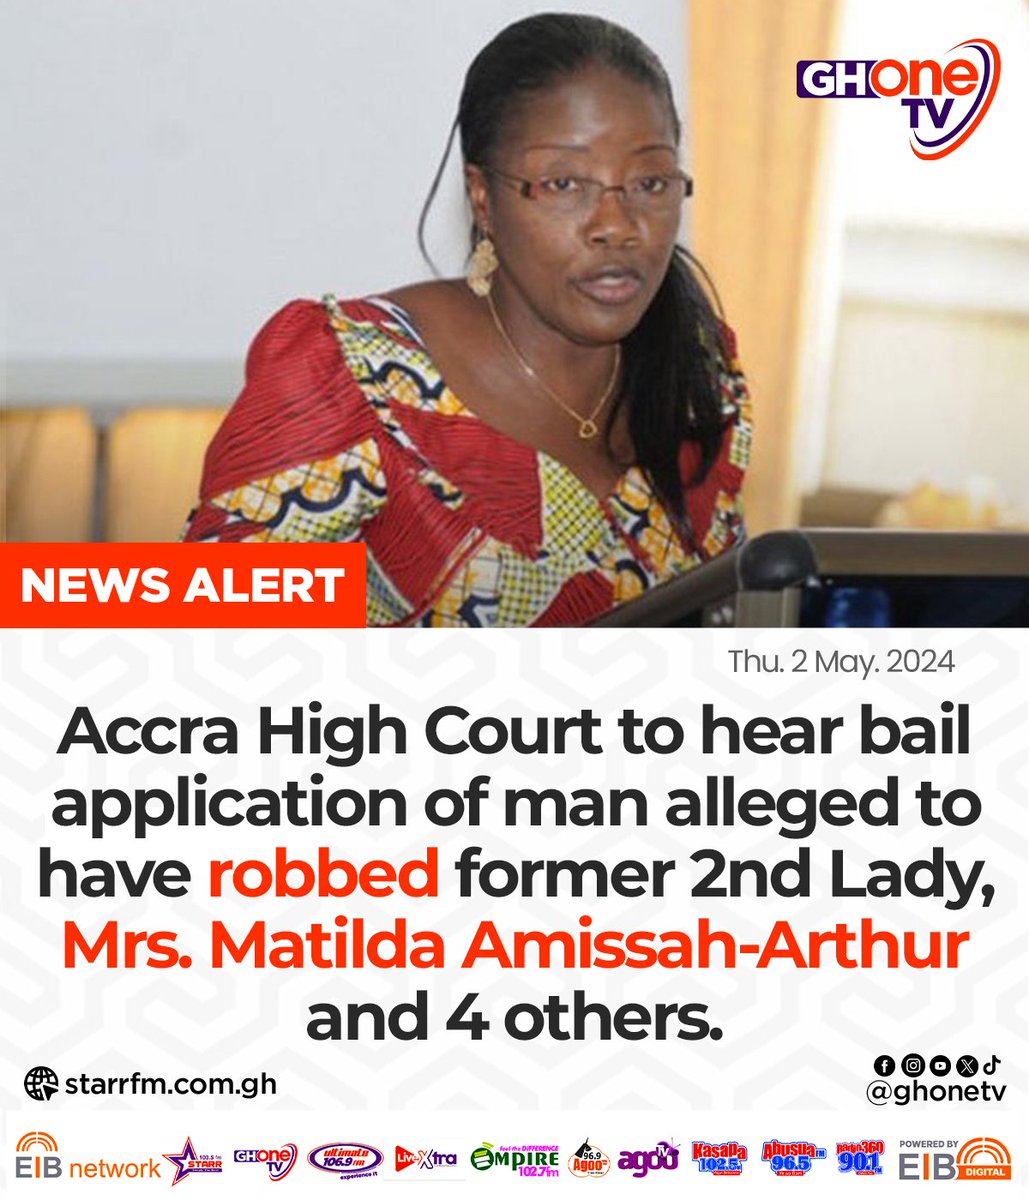 Former 2nd Lady robbery case: High Court expected to hear the bail application filed by lawyers of the man alleged to have robbed Mrs. Matilda Amissah-Arthur...

#GHOneNews #GHOneTV